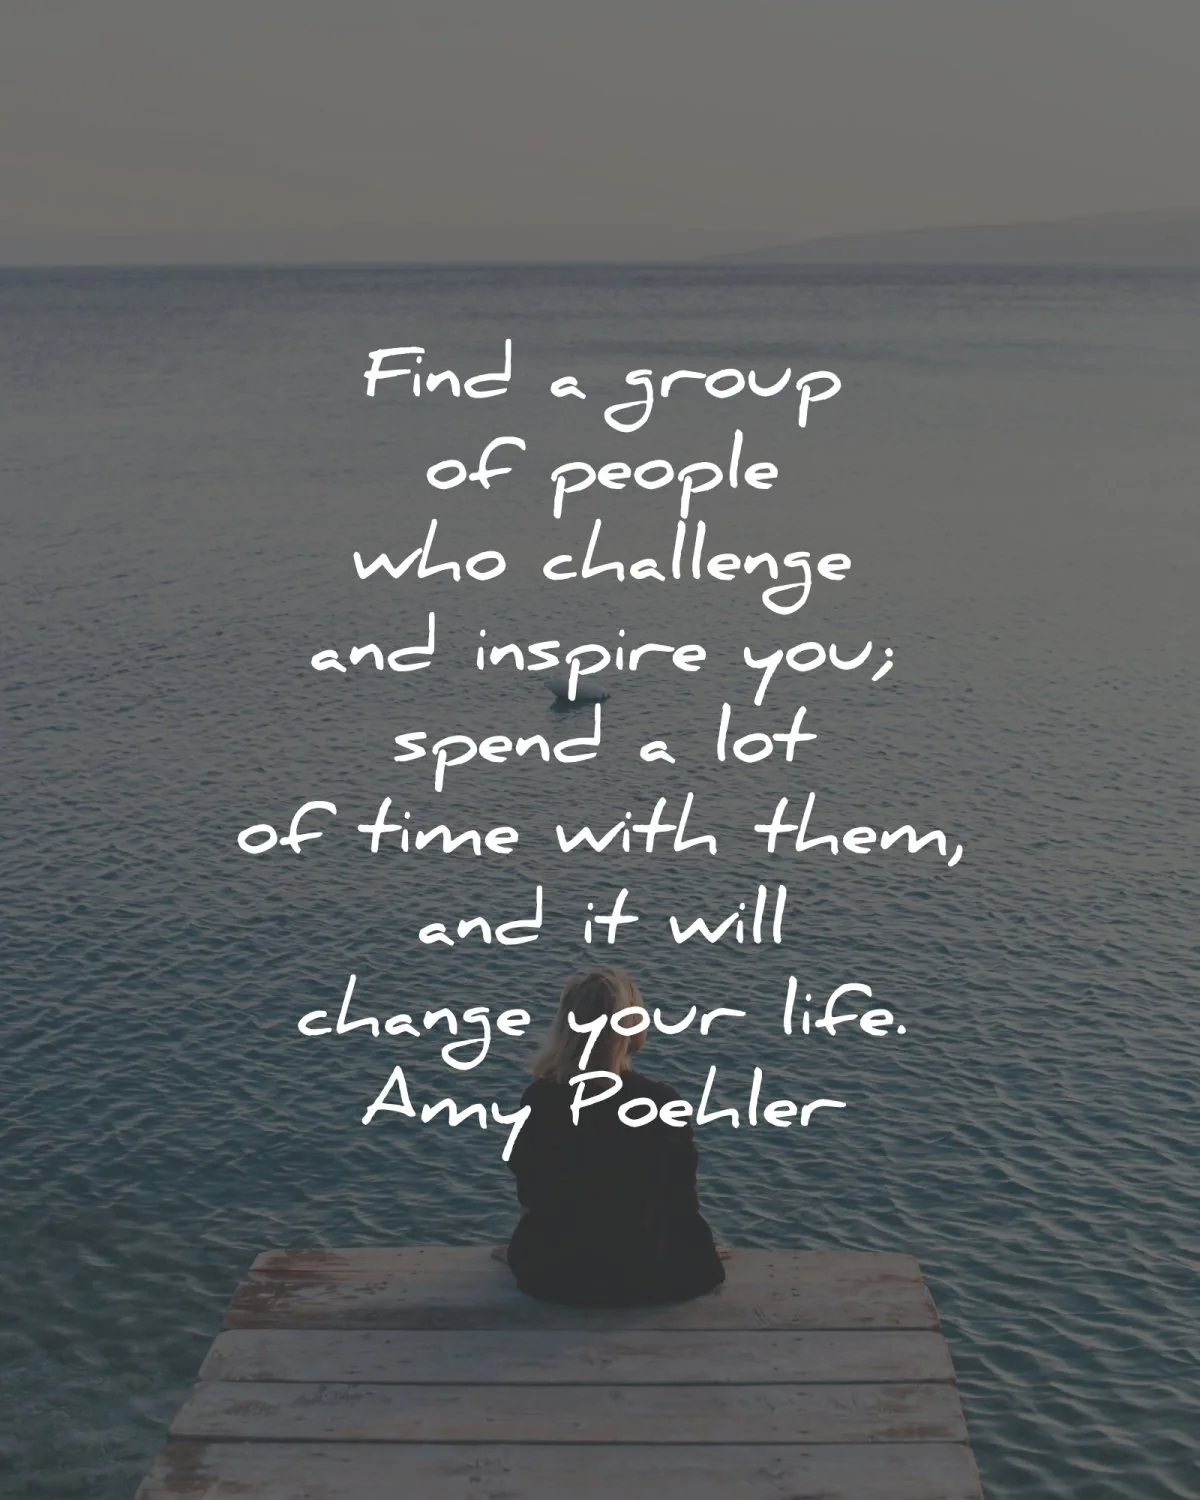 friendship quotes find group people challenge amy poehler wisdom